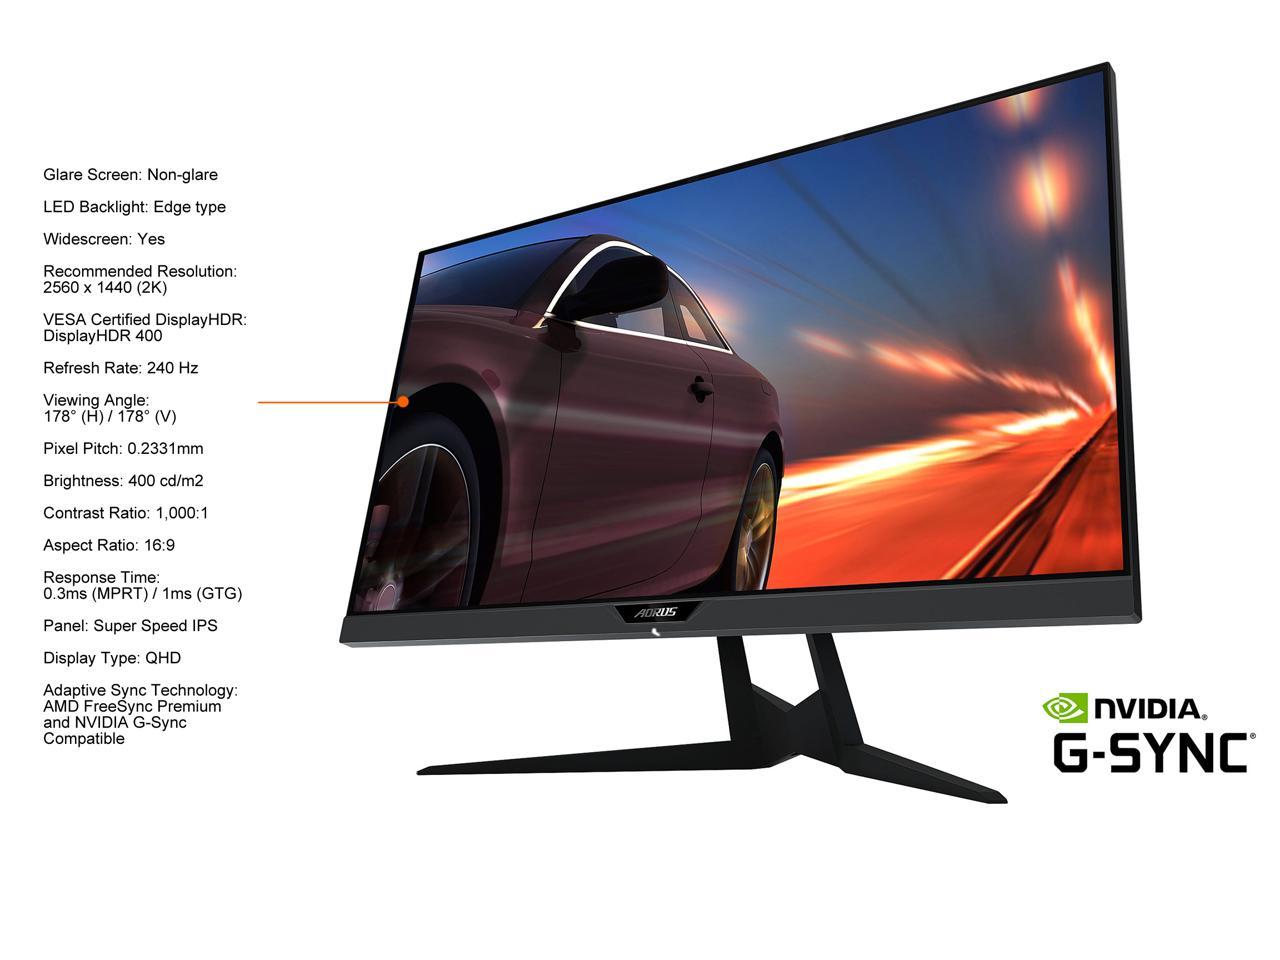 Aorus Fi27q X 27 240hz 1440p Hbr3 G Sync Compatible Ss Ips Gaming Monitor Exclusive Built In Anc 2560 X 1440 0 3ms Response Time Hdr 93 Dci P3 1x Display Port 1 4 2x Hdmi 2 0 2x